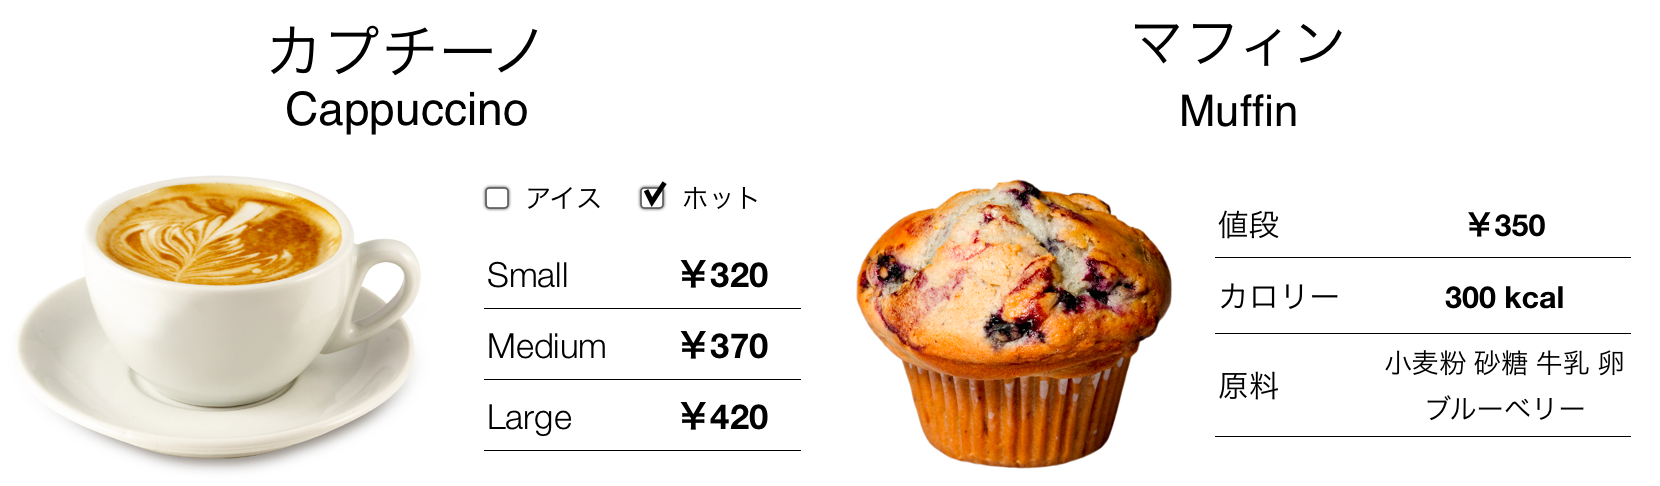 customfields-cafe-cappuccino-muffin.png